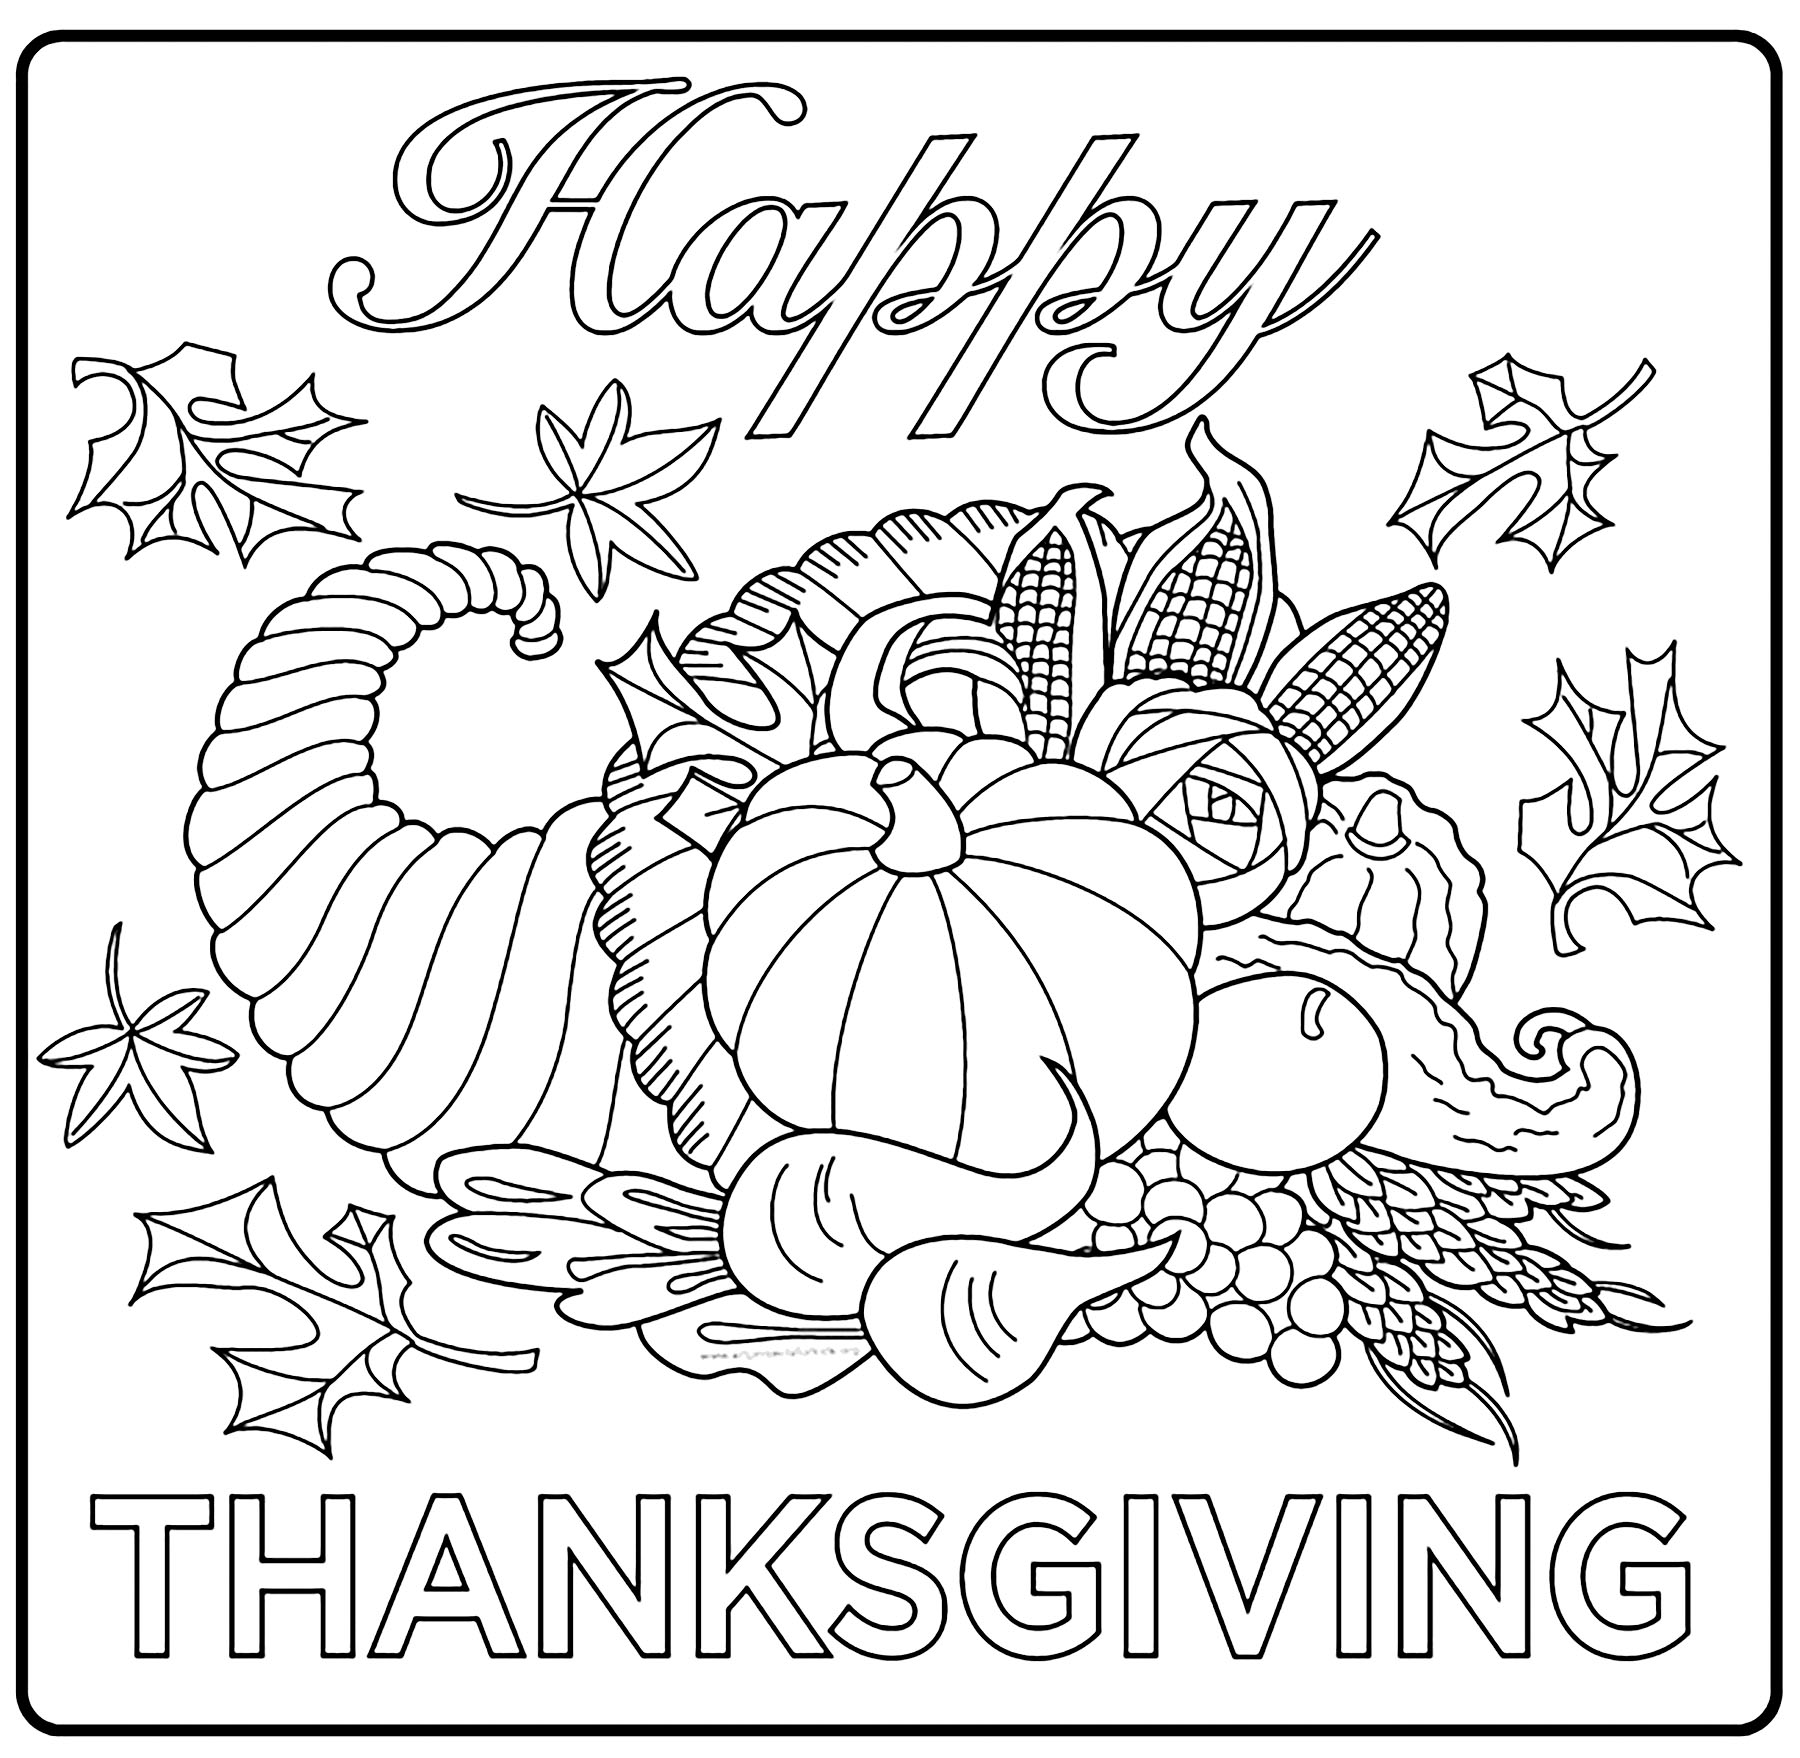 thanksgiving-free-to-color-for-children-thanksgiving-kids-coloring-pages